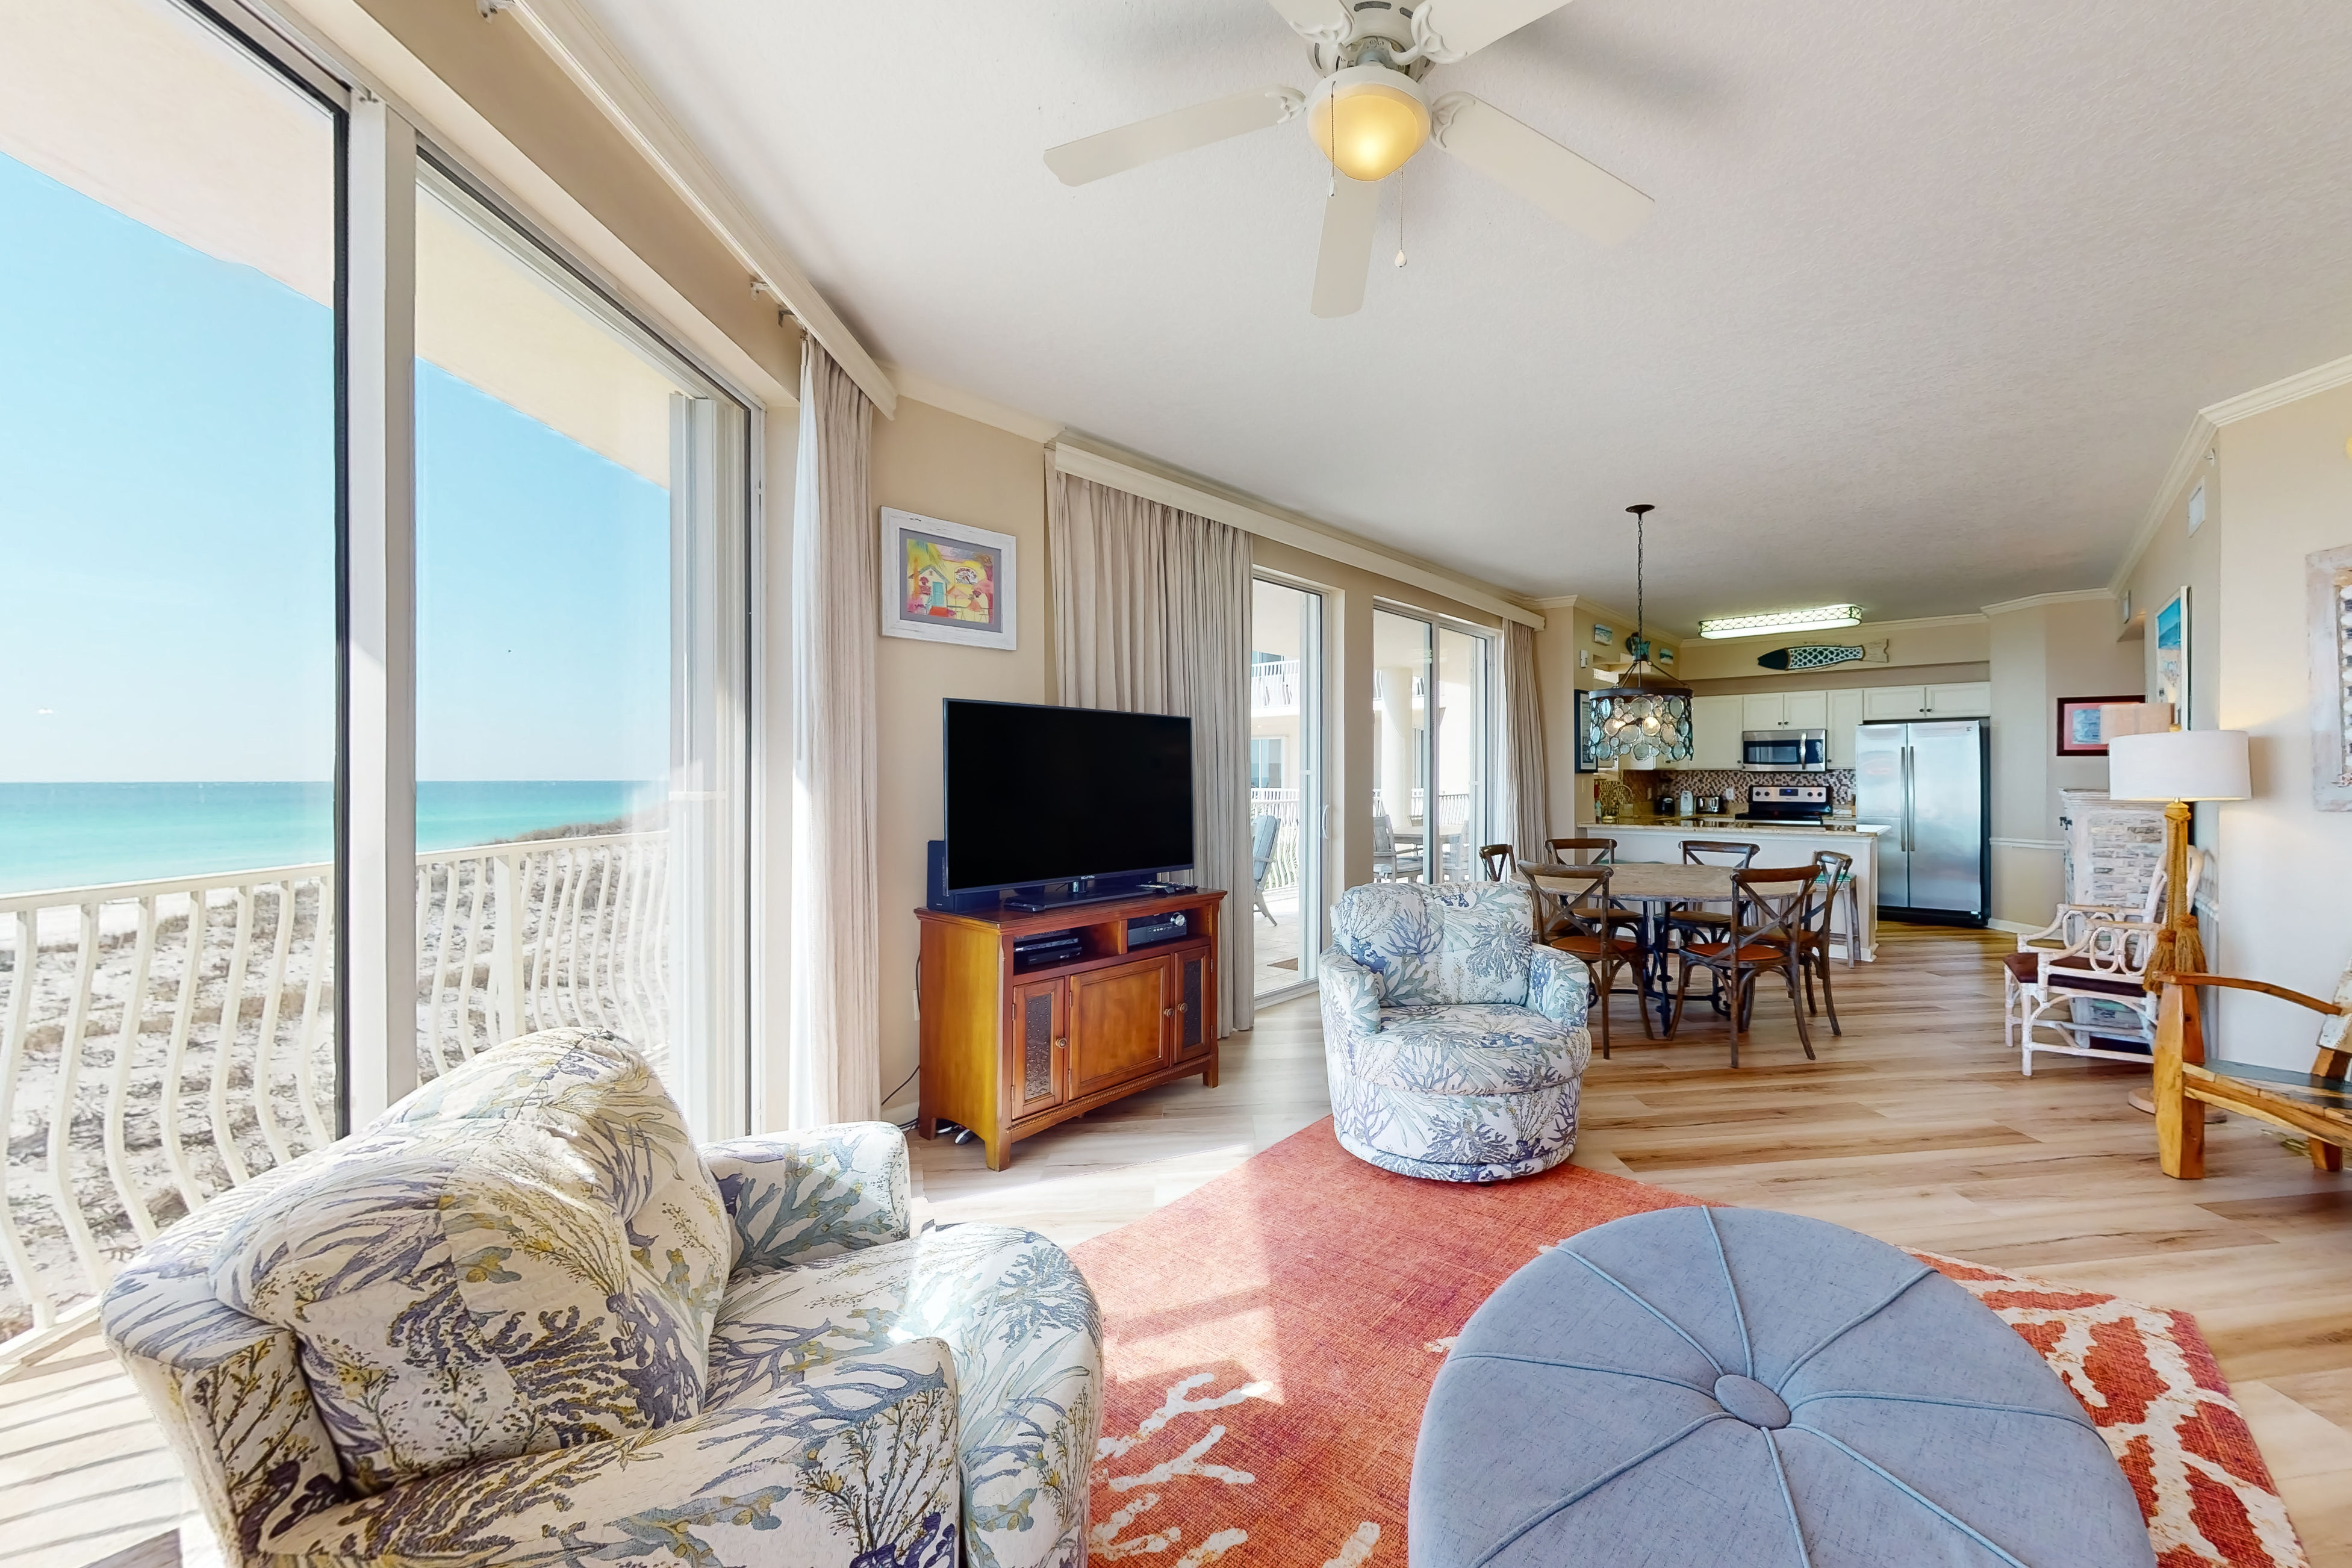 Dunes of Seagrove A209 Condo rental in Dunes of Seagrove in Highway 30-A Florida - #5